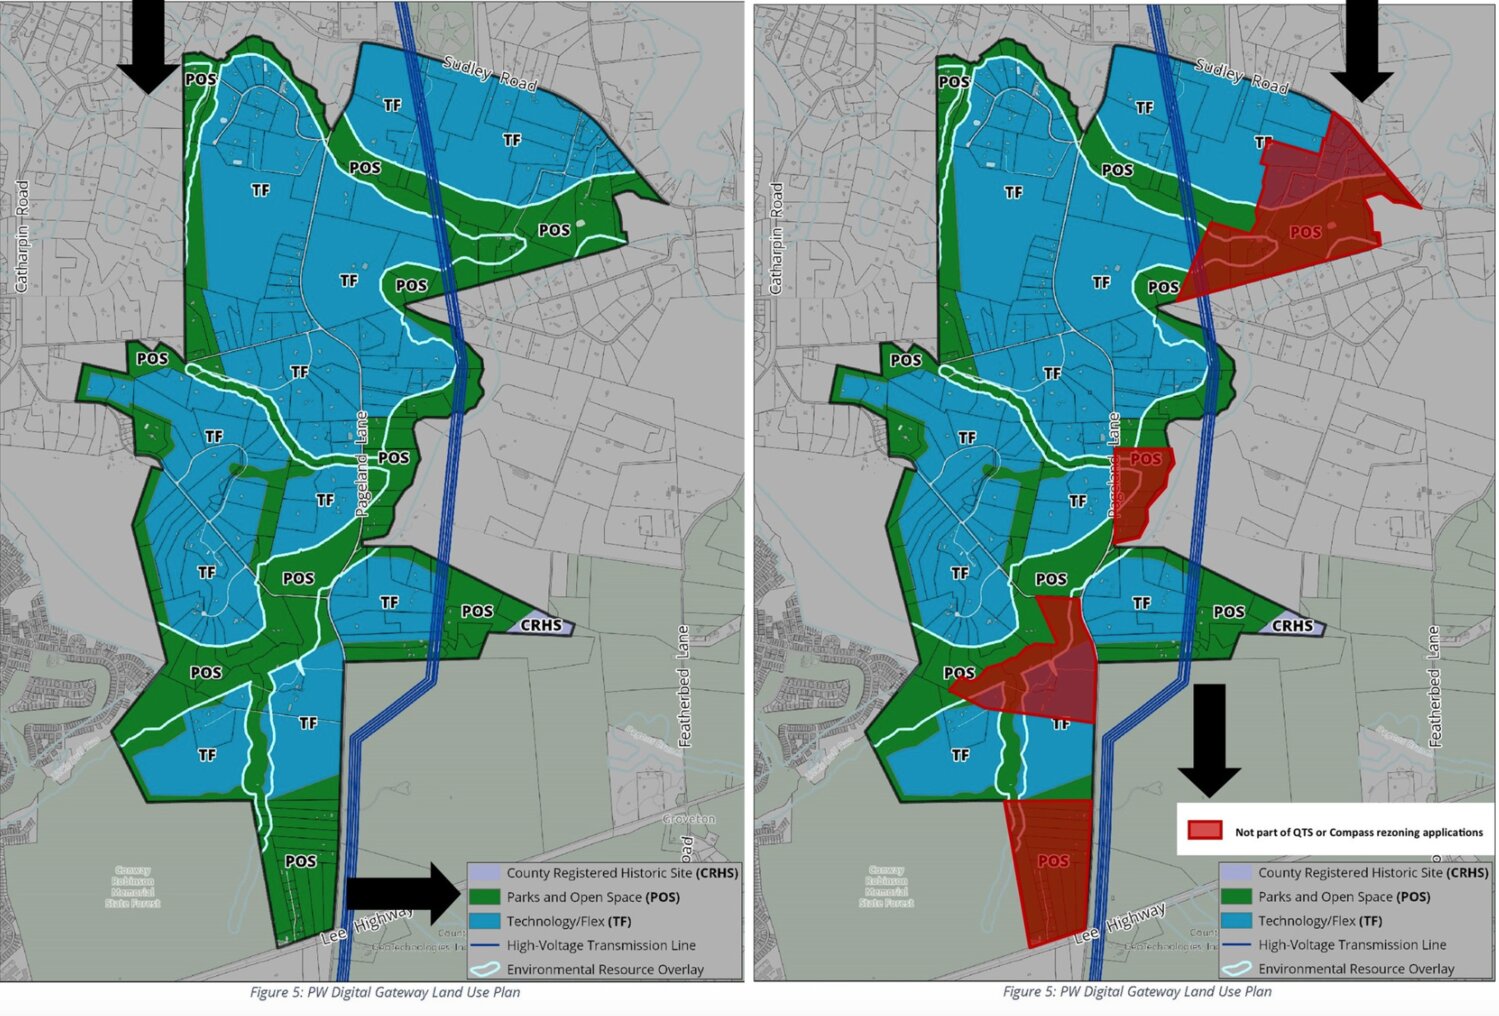 The Coalition to Protect Prince William County shared an image that demonstrates that several open spaces and park profers offered by the Digital Gateway Developers are not theirs to offer.